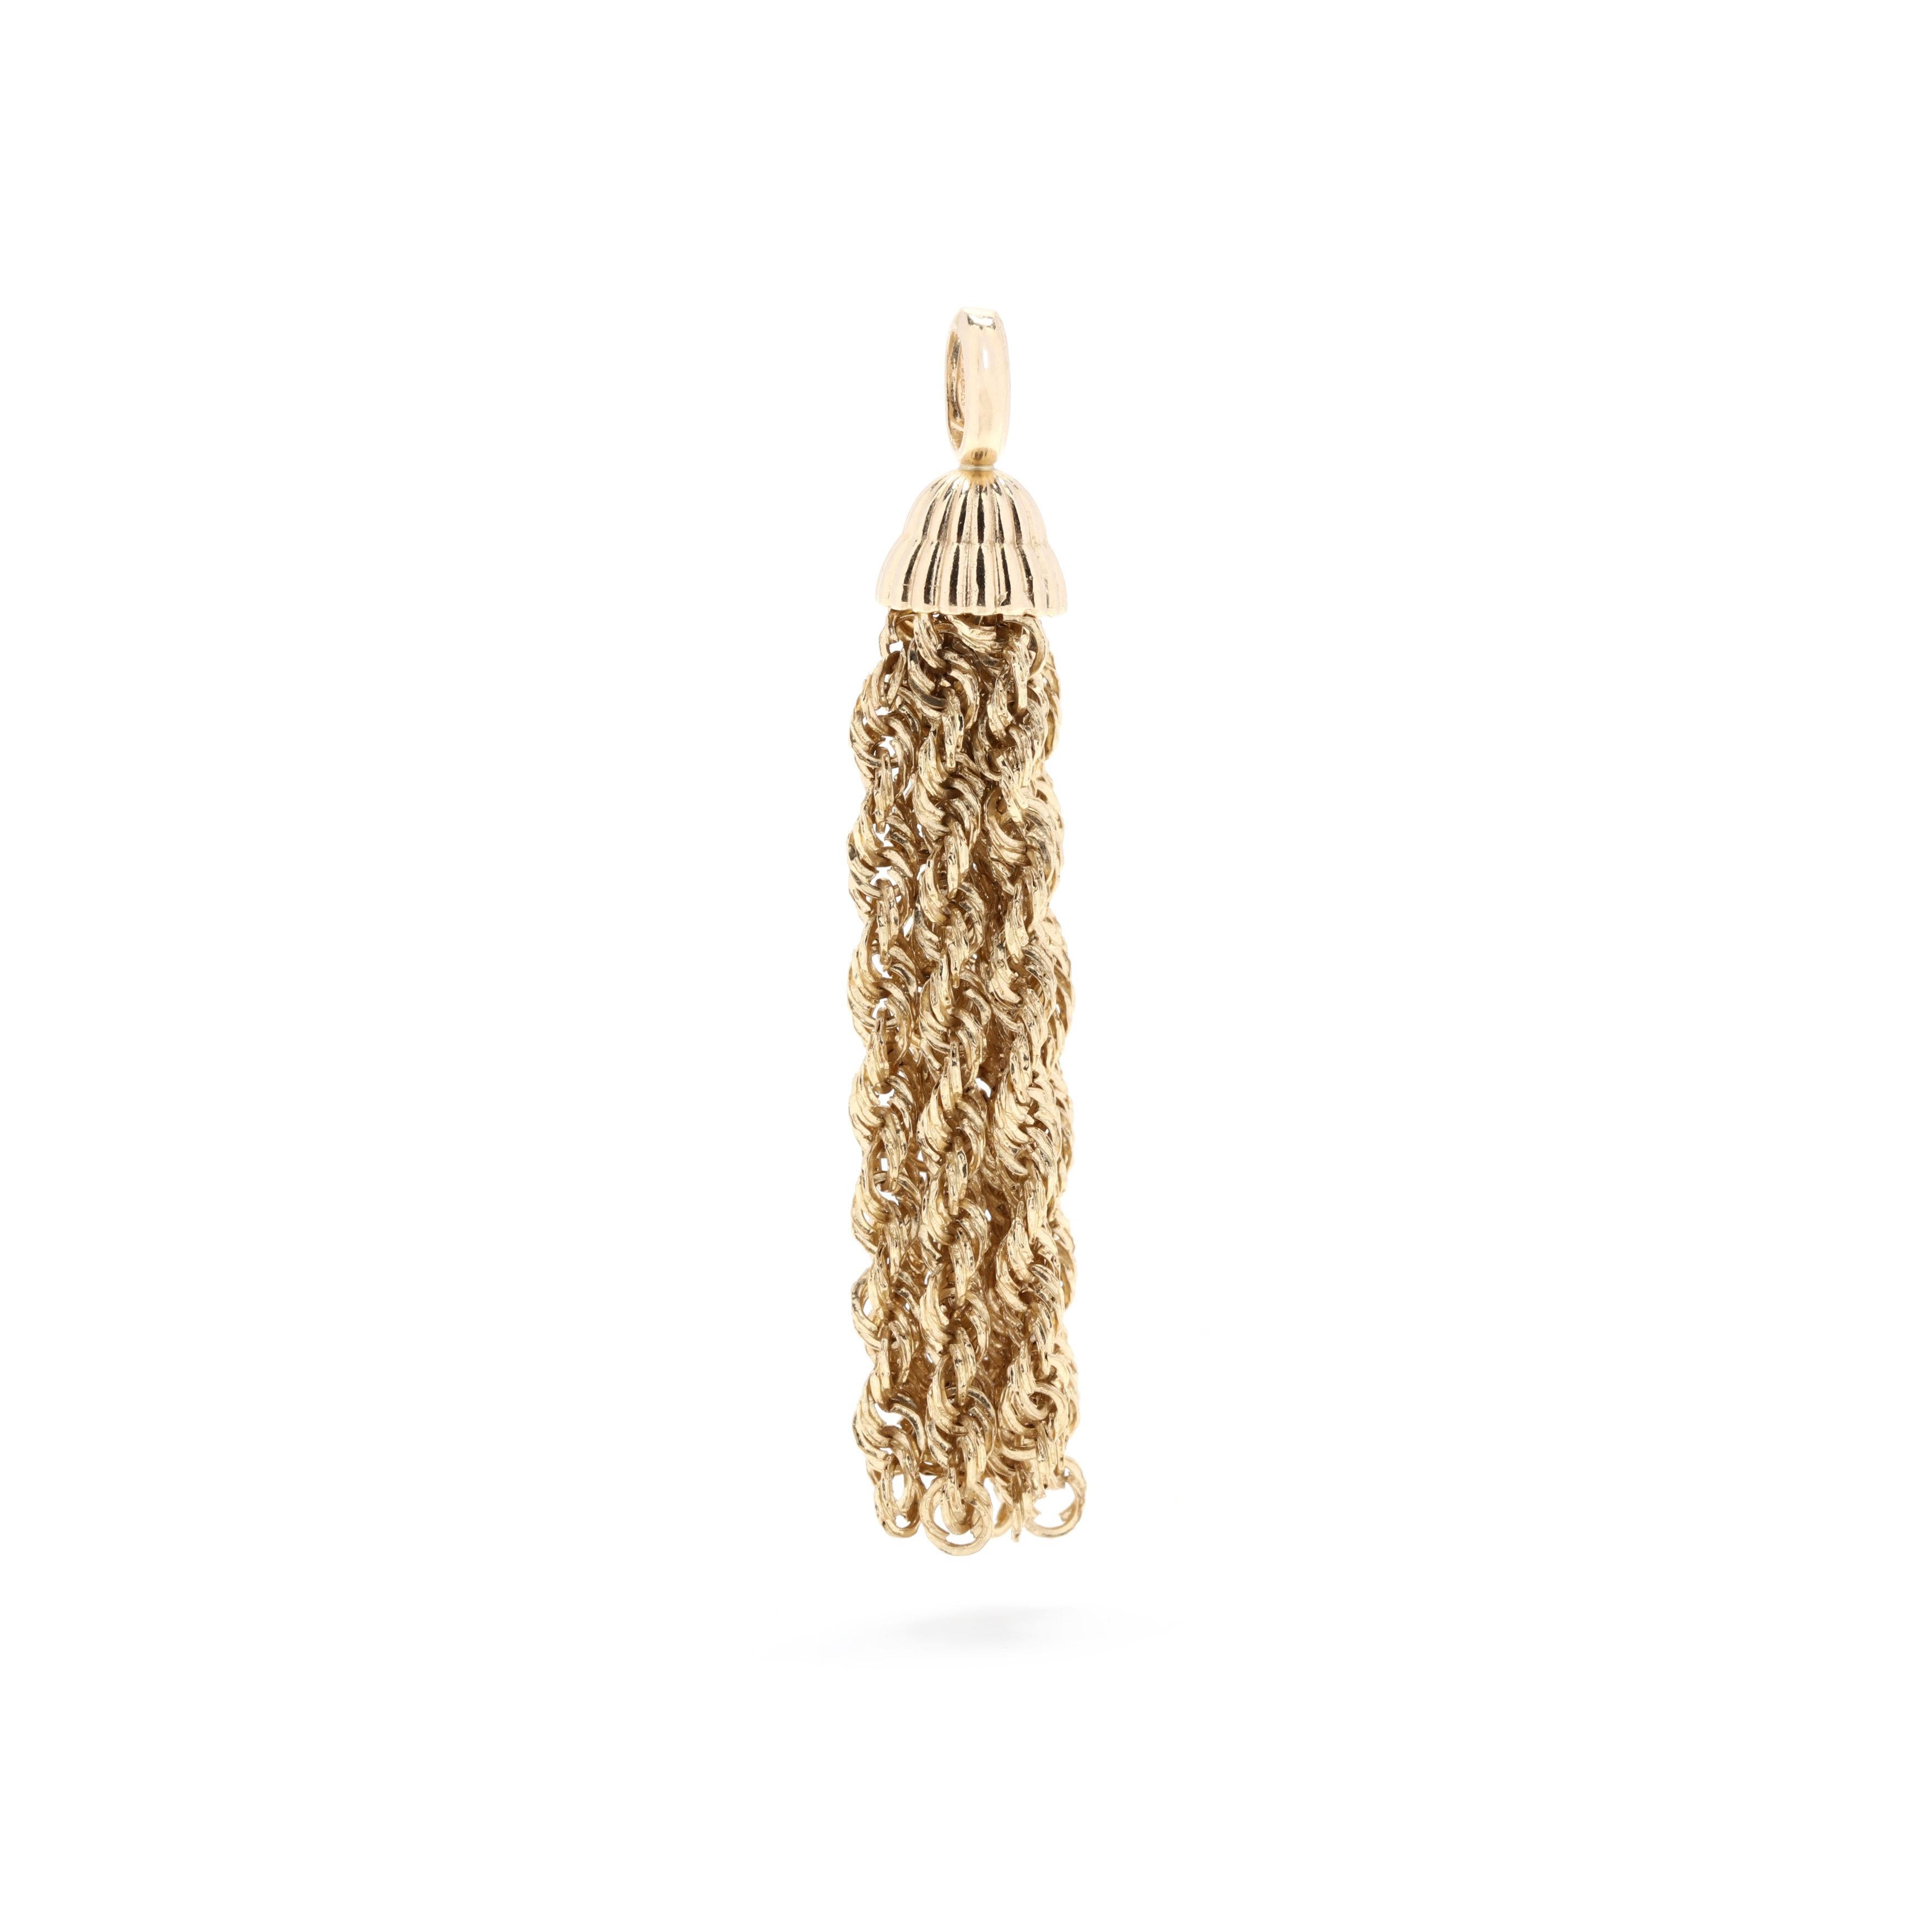 A vintage 14 karat yellow gold tassel charm. This light weight charm features mutliple rope chains in a tassel for suspended from a ridged cap. 



Length: 1 7/8 in.



Width: 3/8 in.



Weight: 1.4 dwts.